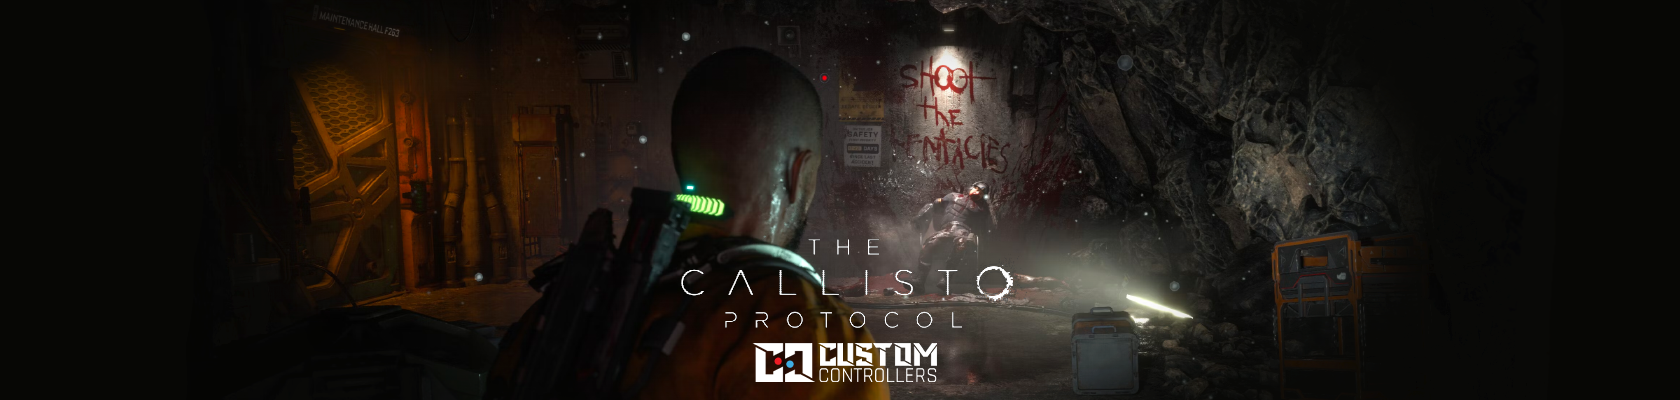 The Callisto Protocol review – broken combat drags down a promising game -  Video Games on Sports Illustrated